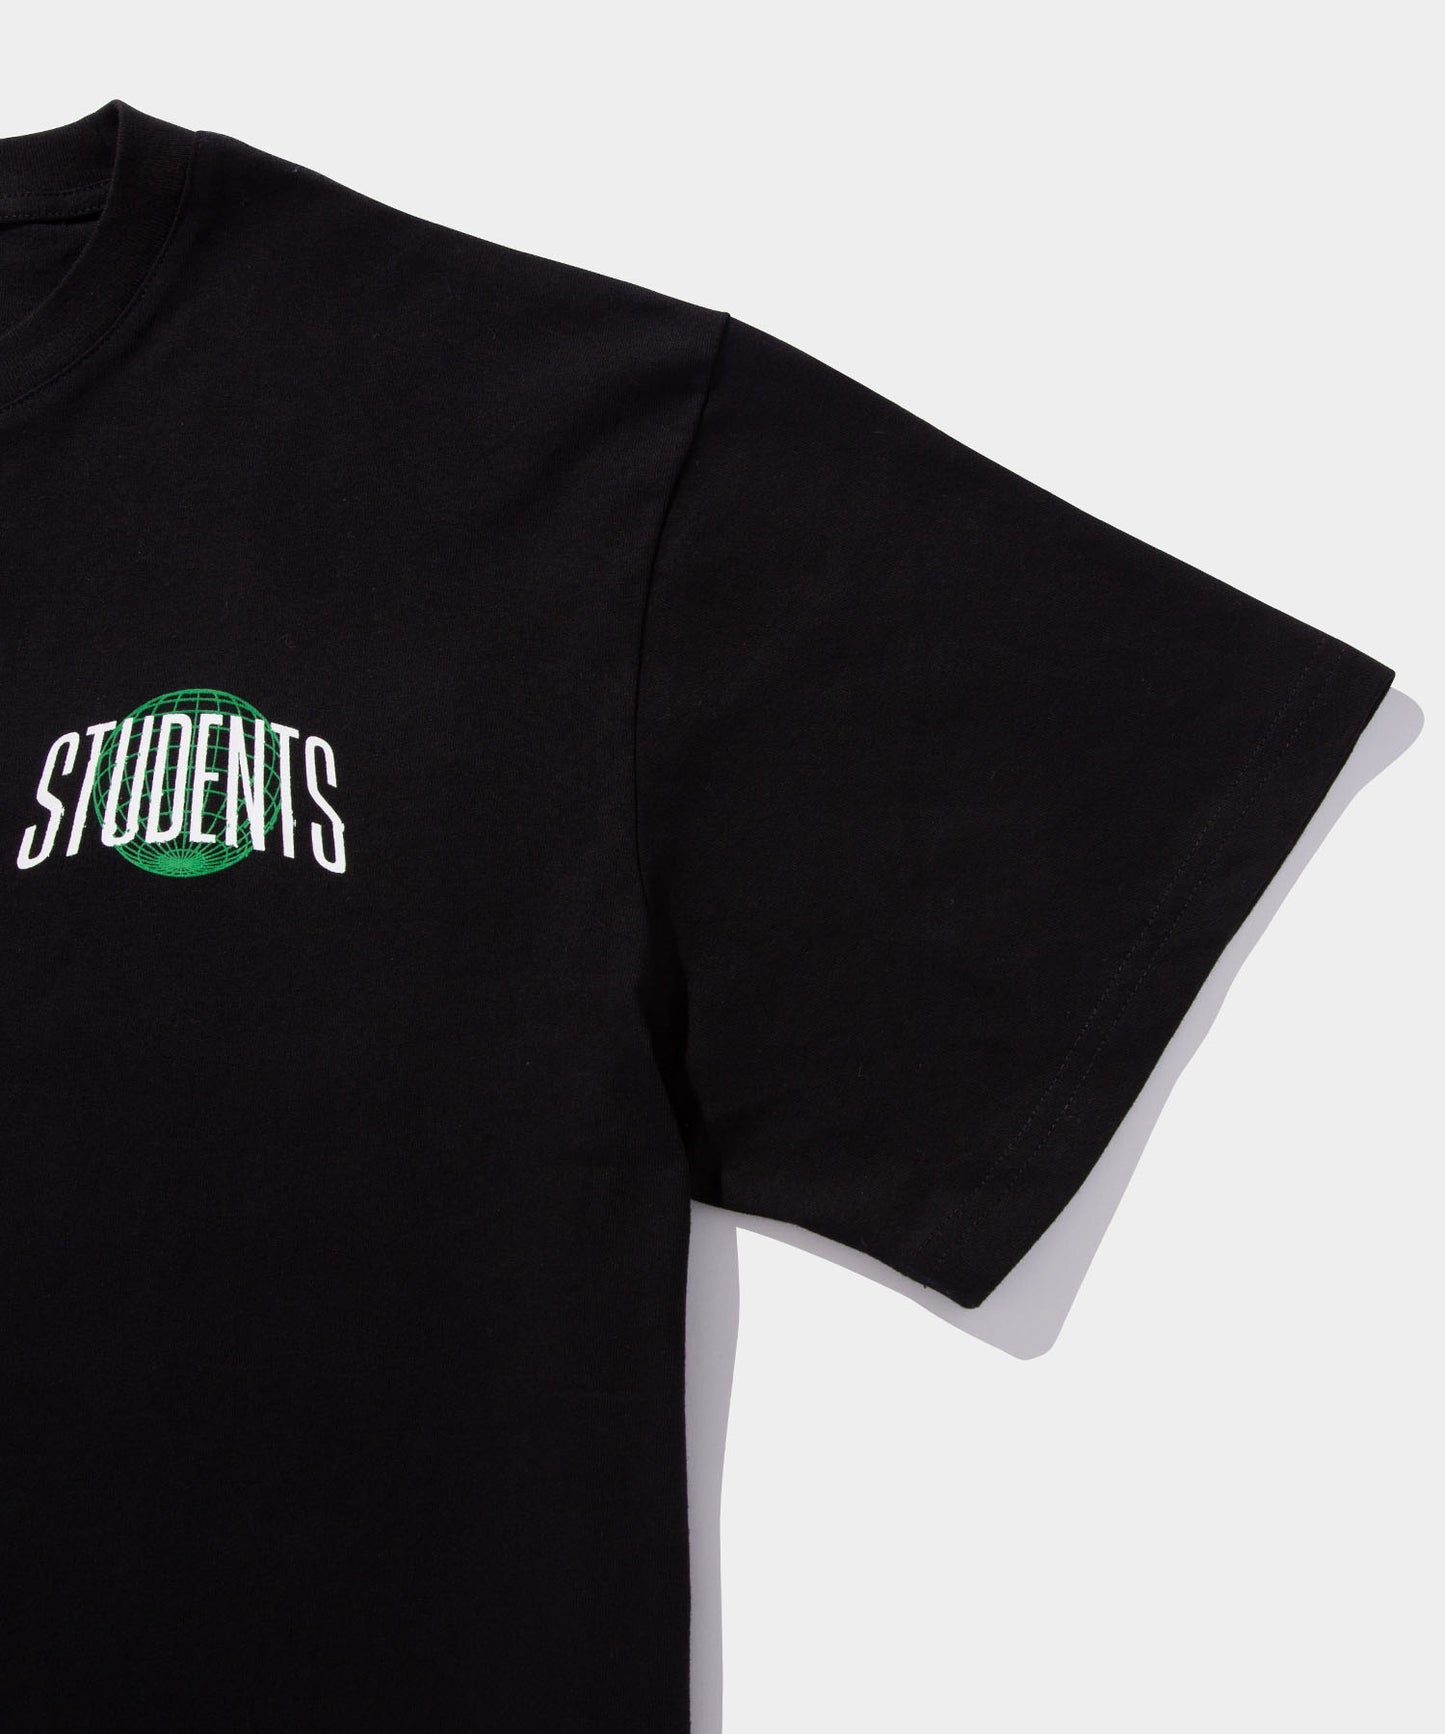 Students Golf Woods And Metals T-shirt BLACK